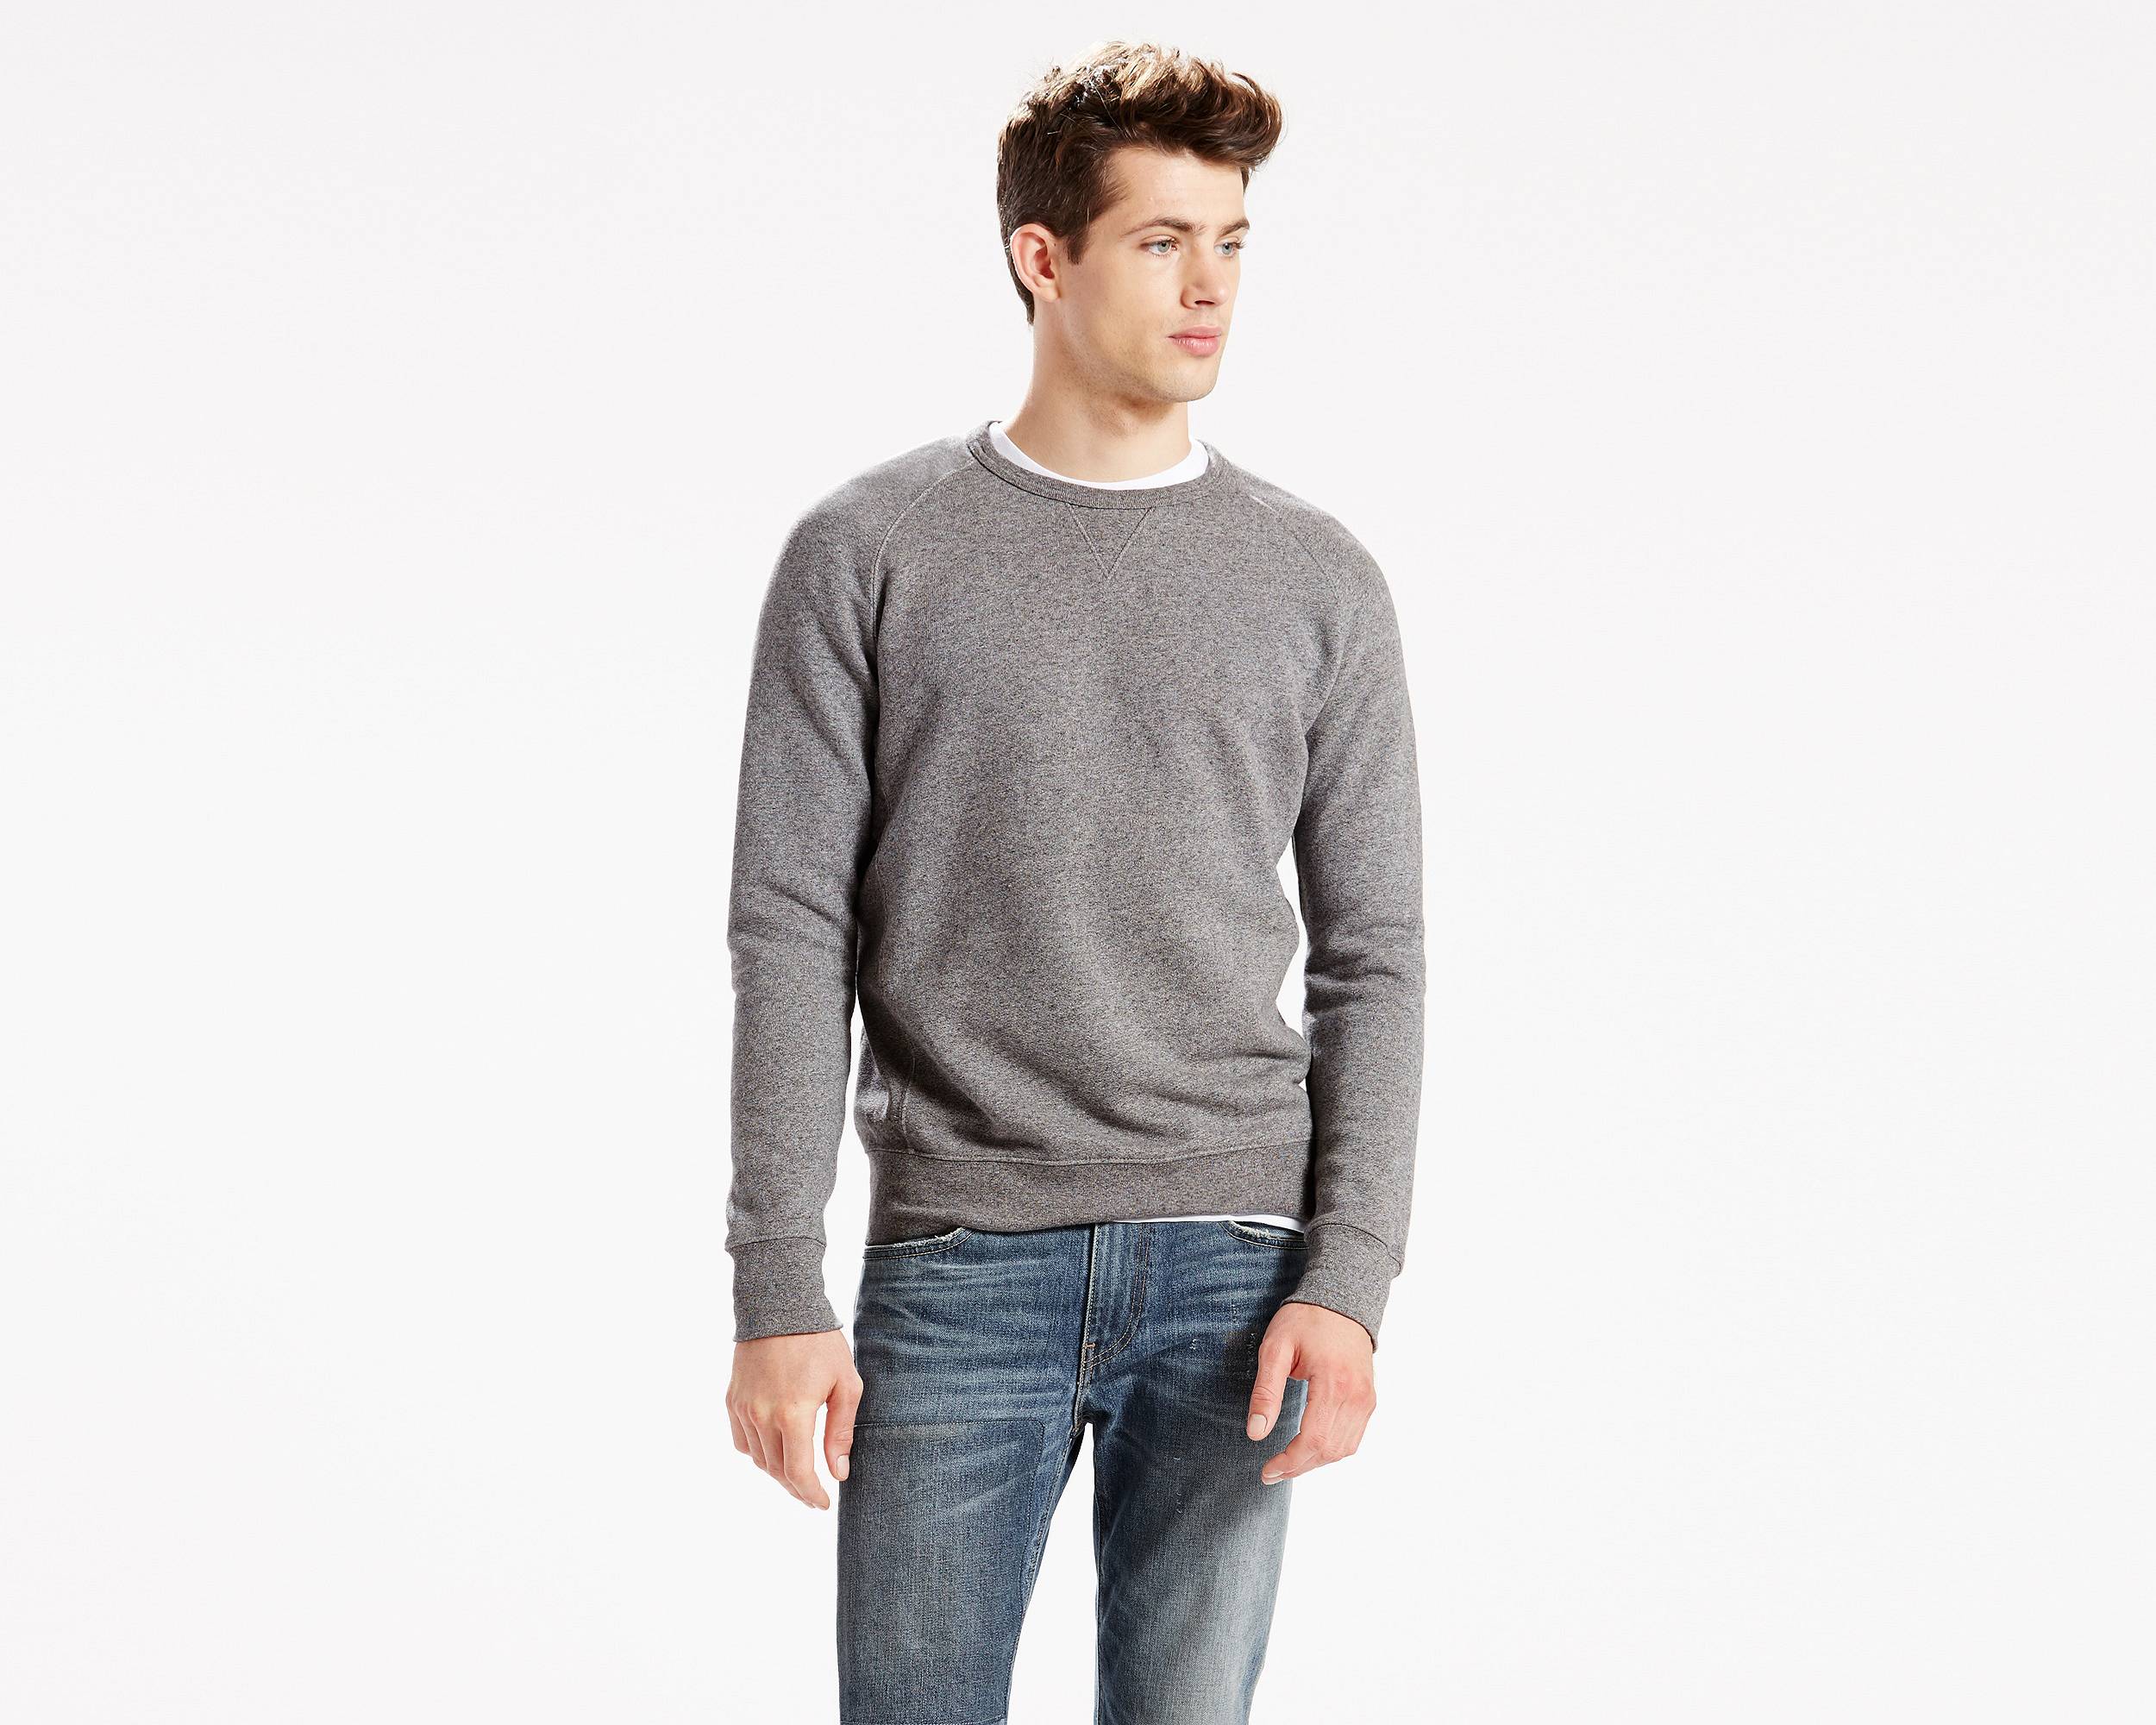 The Most Comfortable Wear For Men – Sweatshirts!